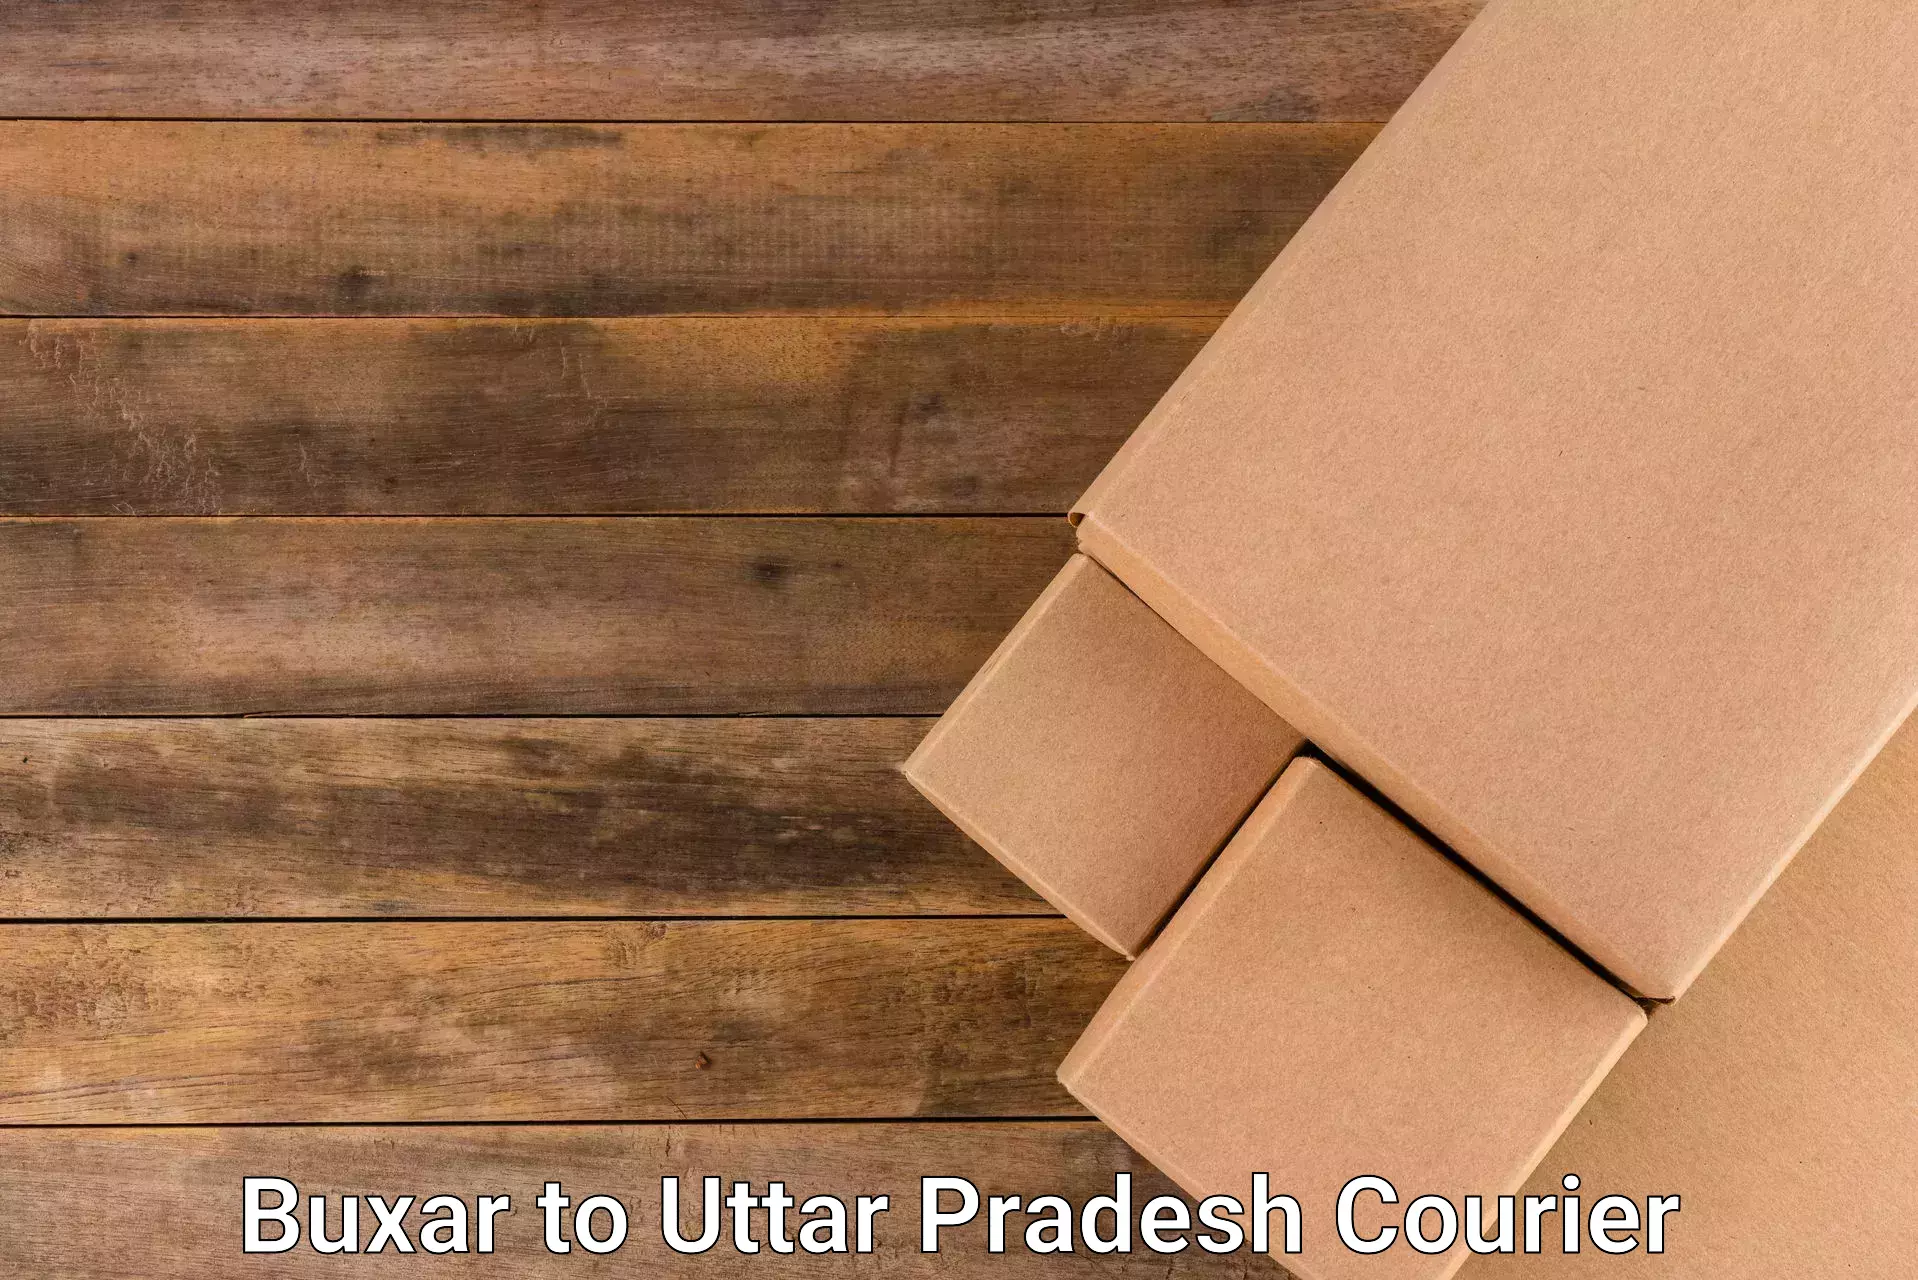 Bulk courier orders Buxar to Jalalabad Shahjahanpur